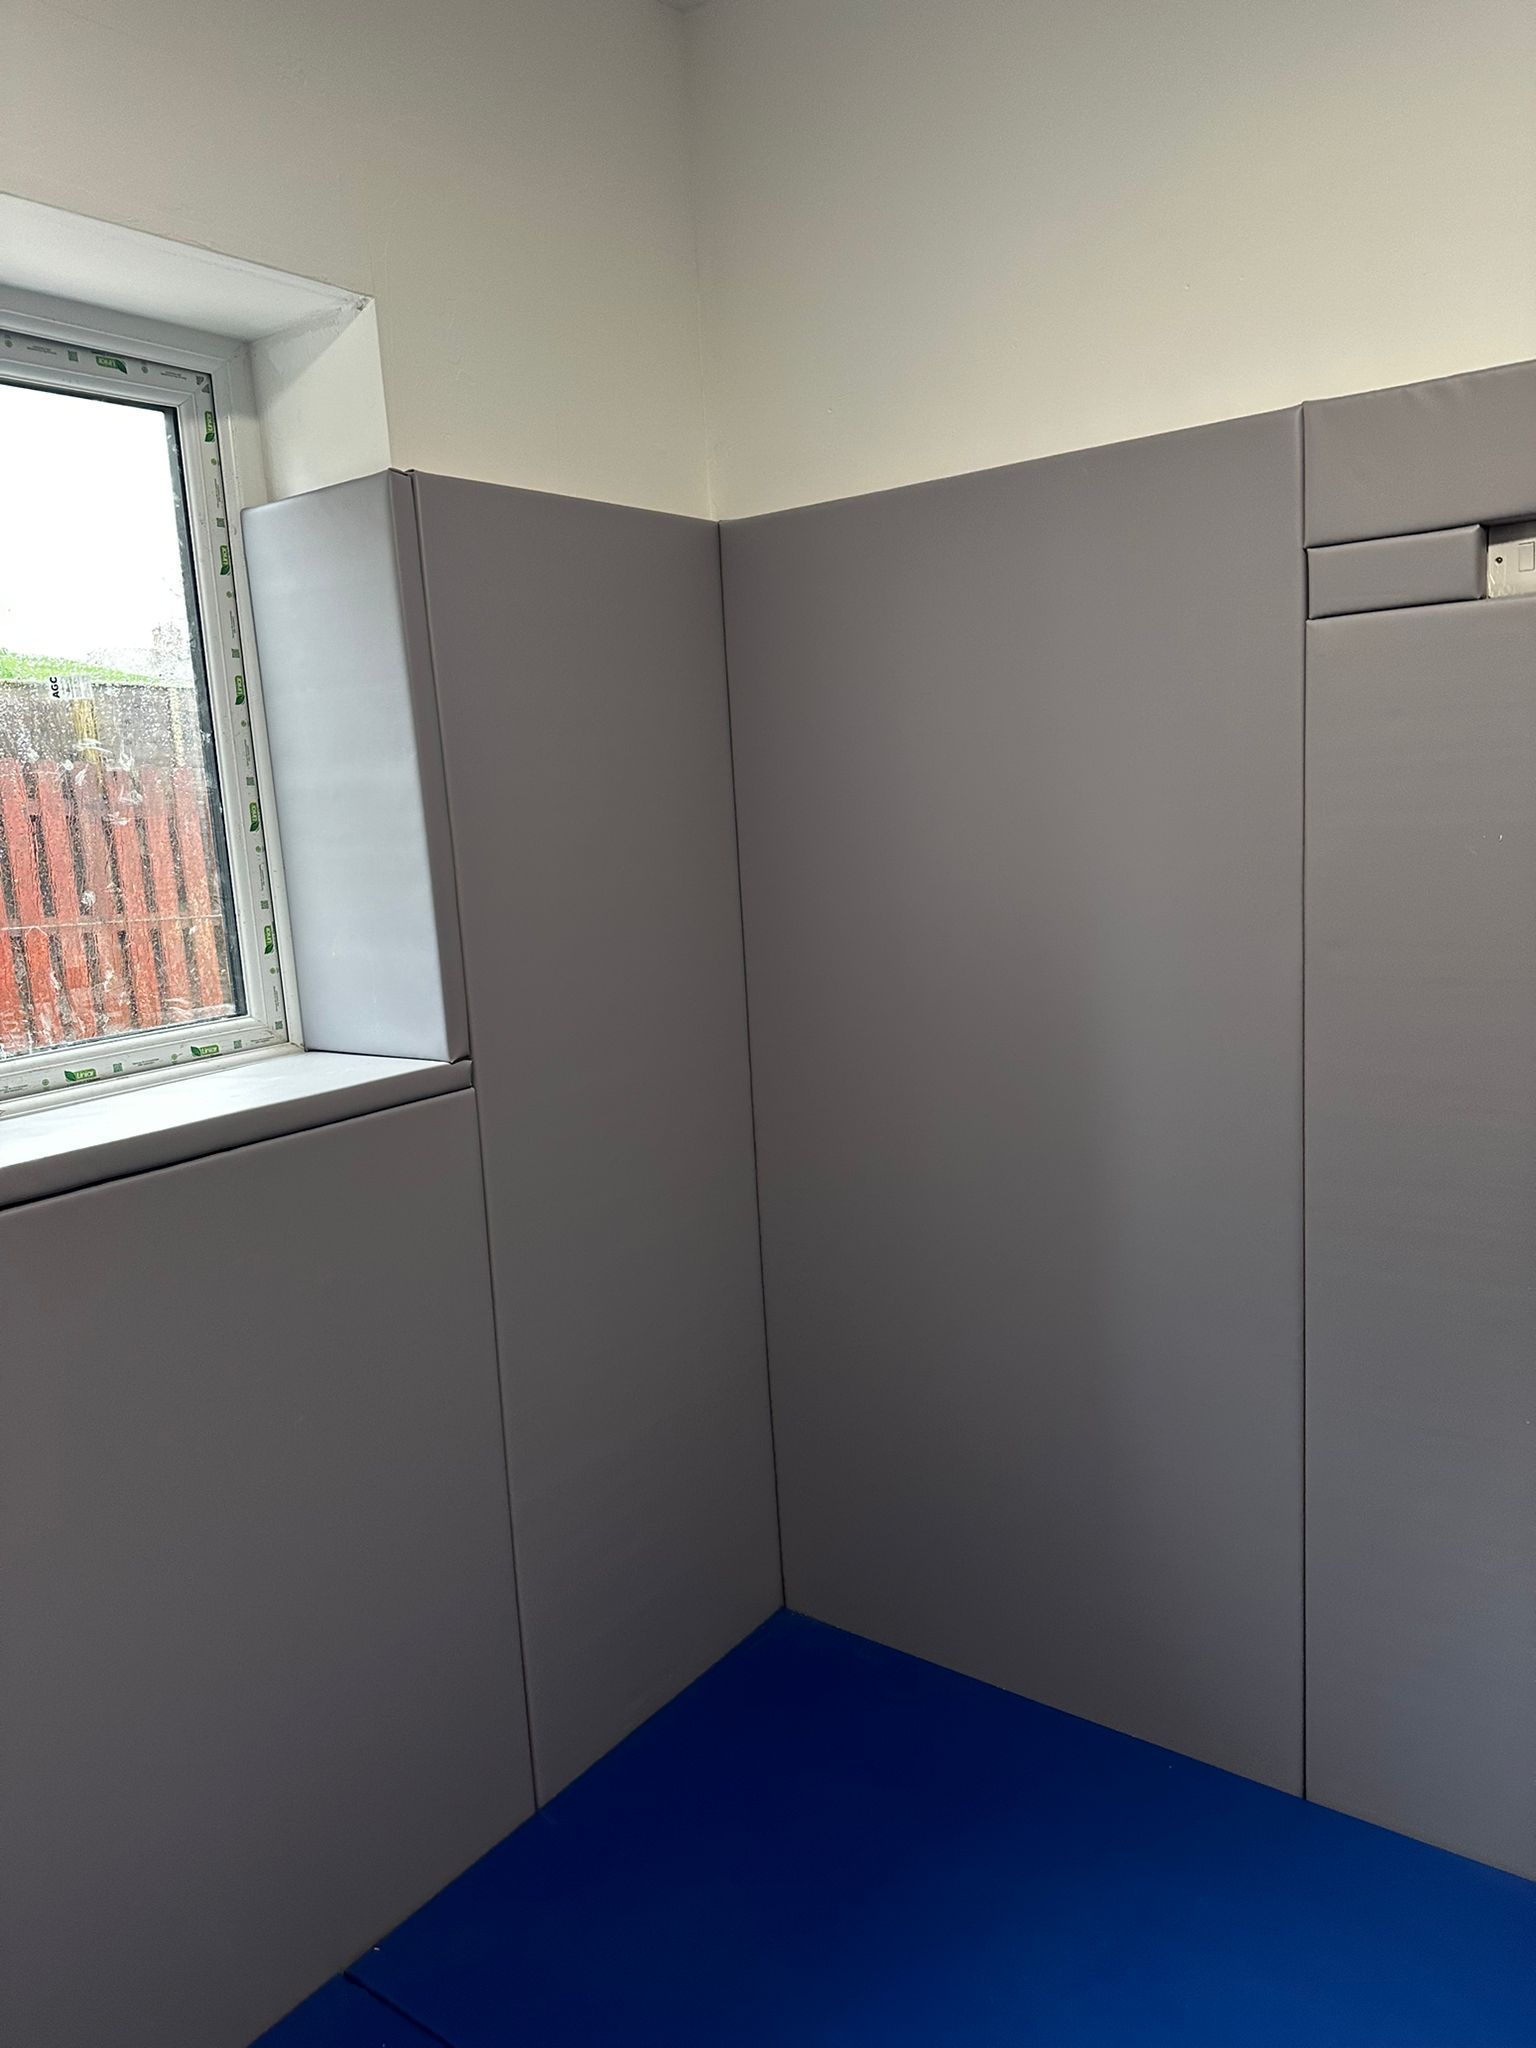 room with a window, a blue padded floor and grey padded walls